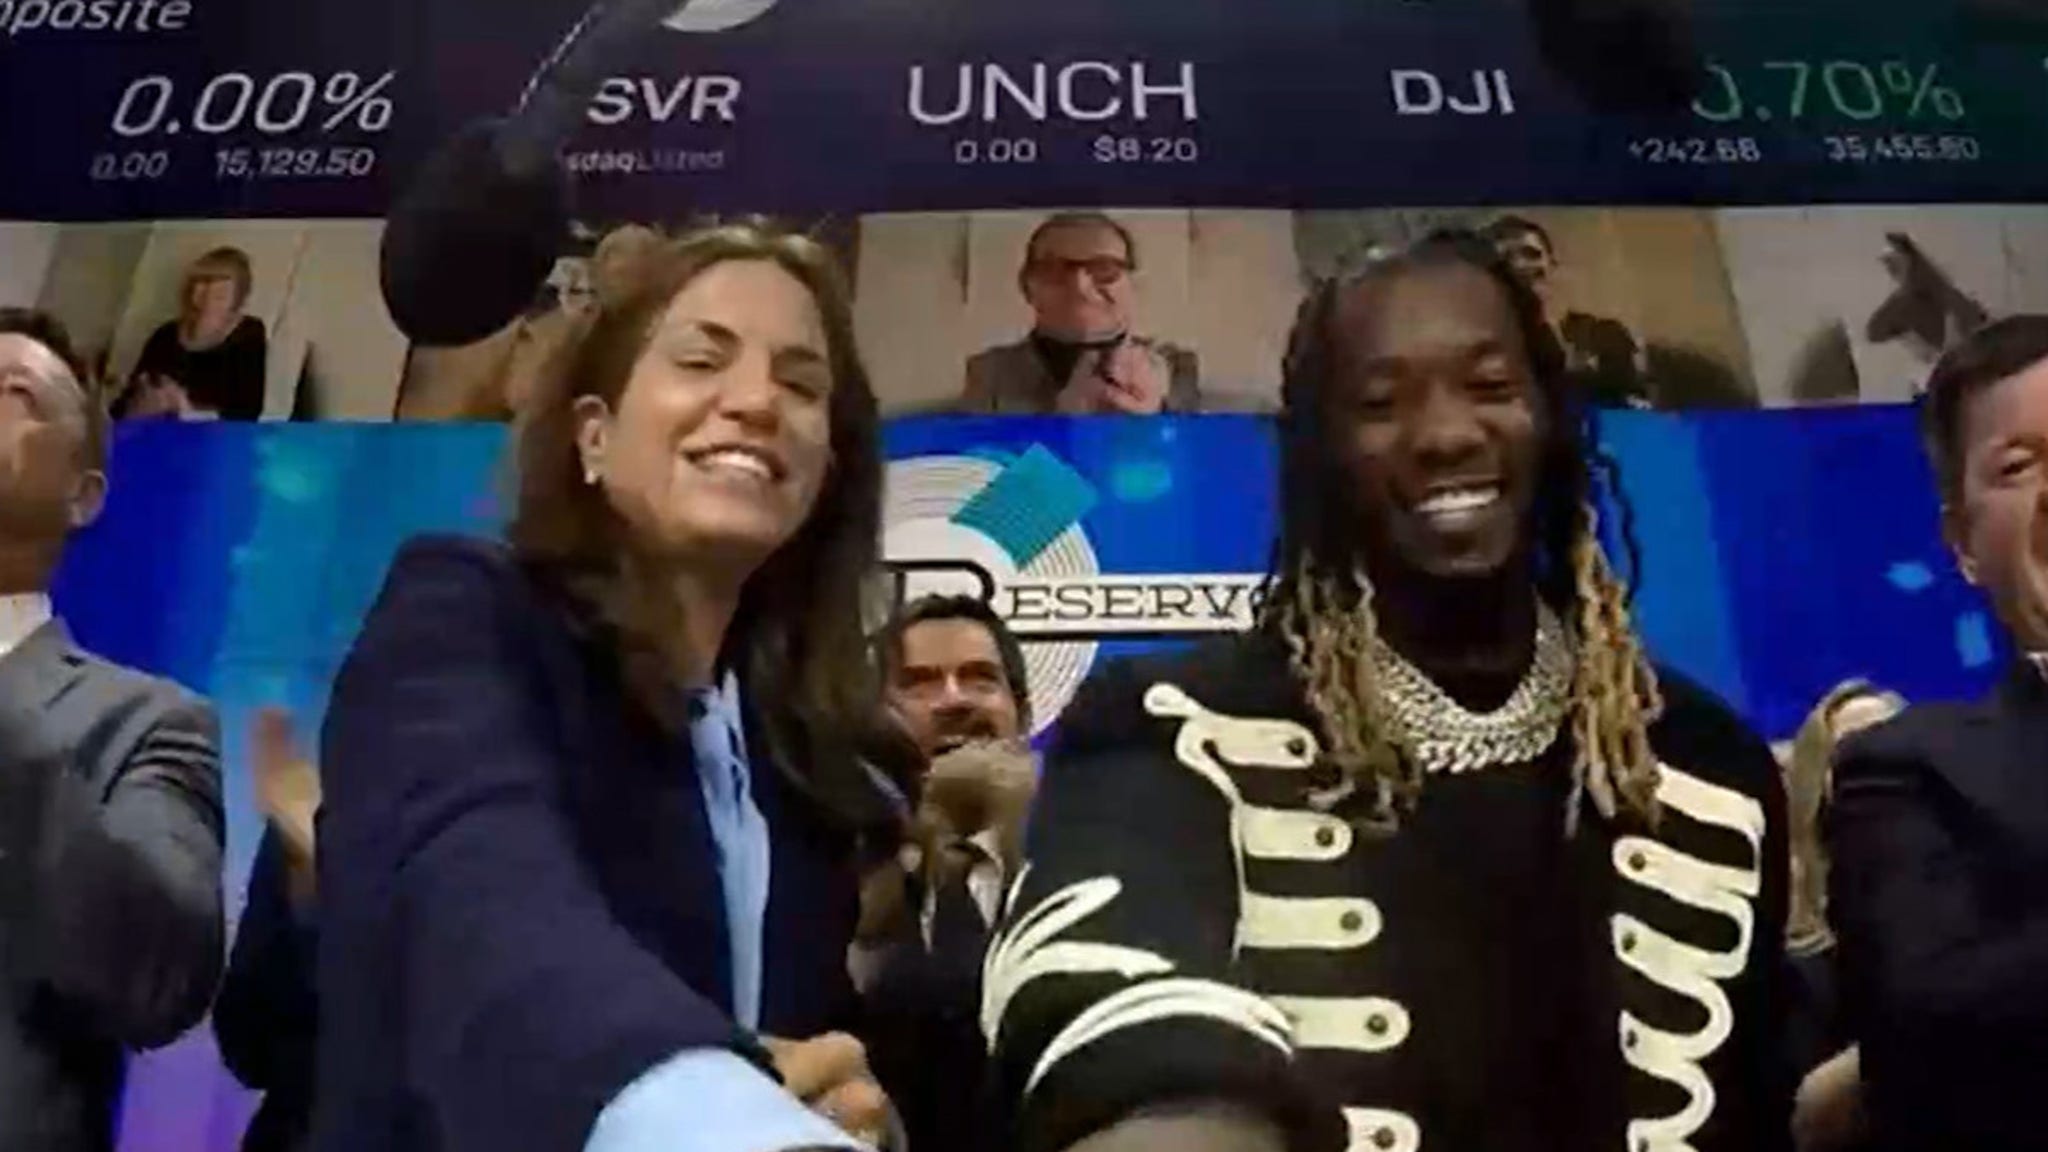 Offset Rings the Opening Bell on NYSE to Celebrate RSVR's July IPO